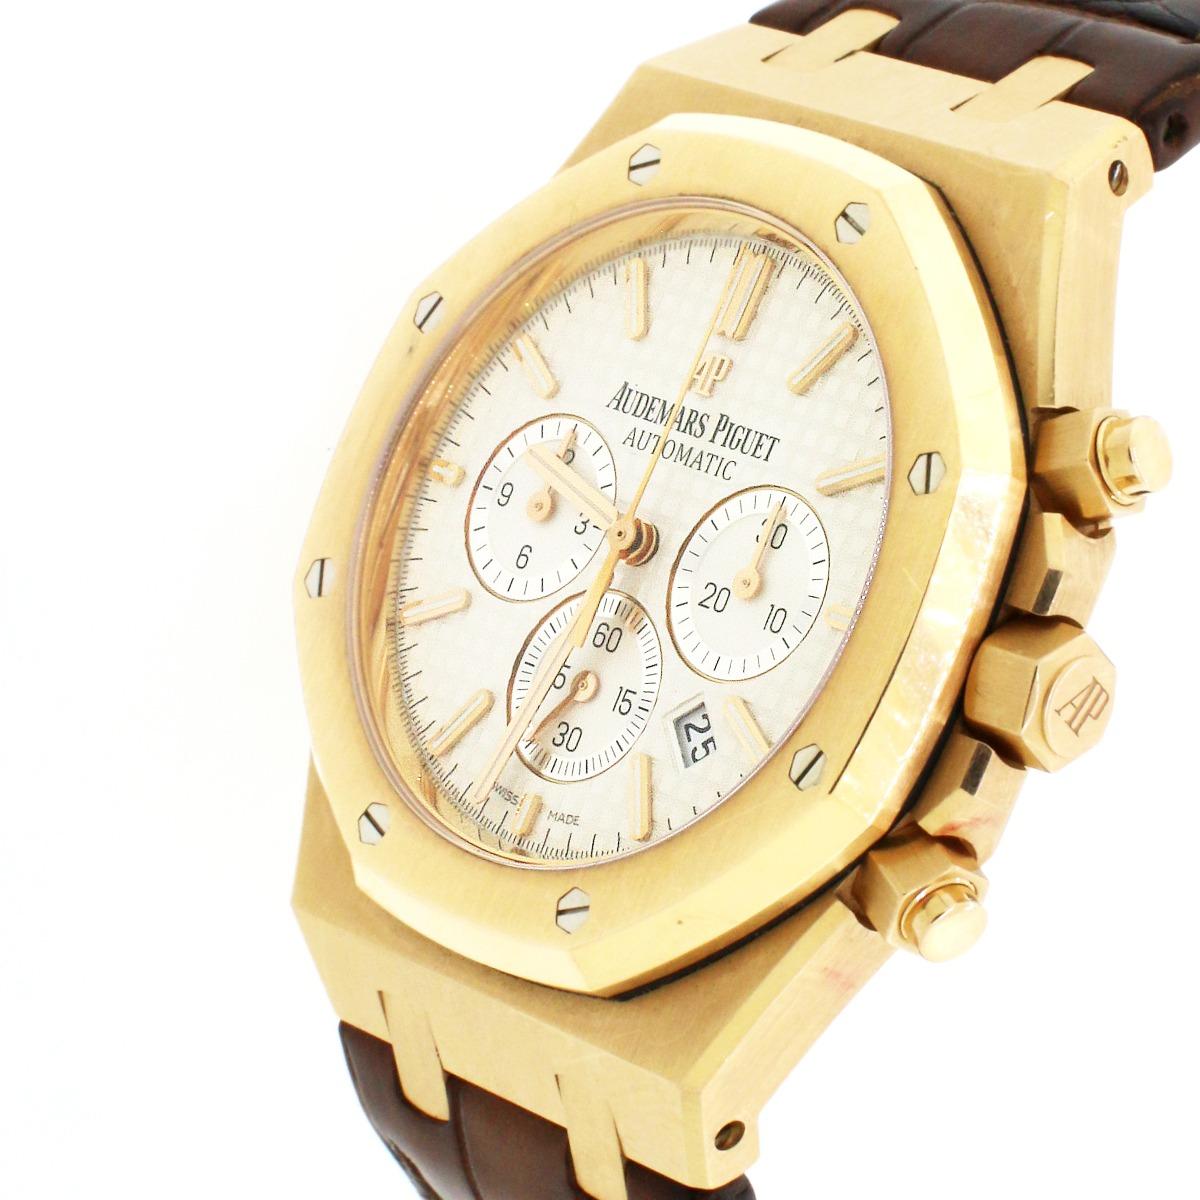 Audemars Piguet Royal Oak 18 Karat Rose Gold Chronograph Box Papers Watch In Excellent Condition For Sale In New York, NY